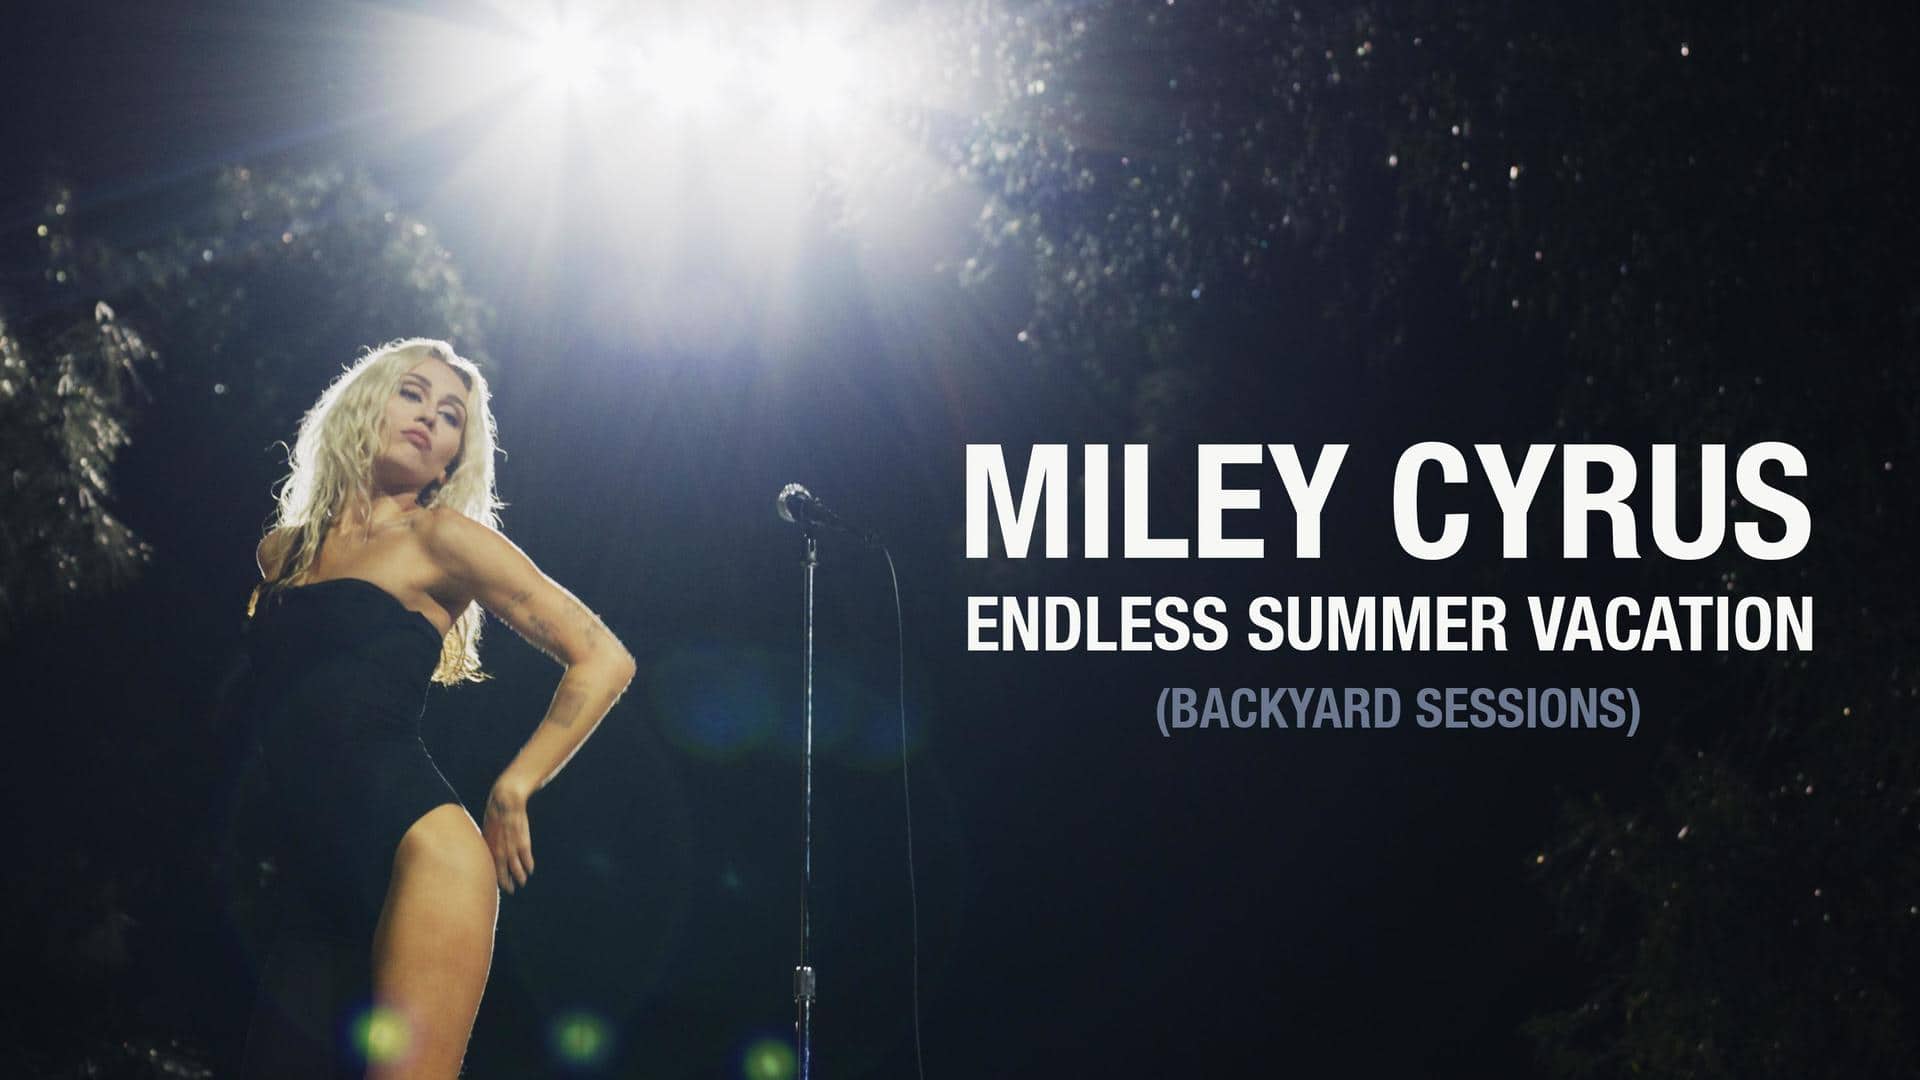 Miley Cyrus's 'Endless Summer Vacation' to release on this date